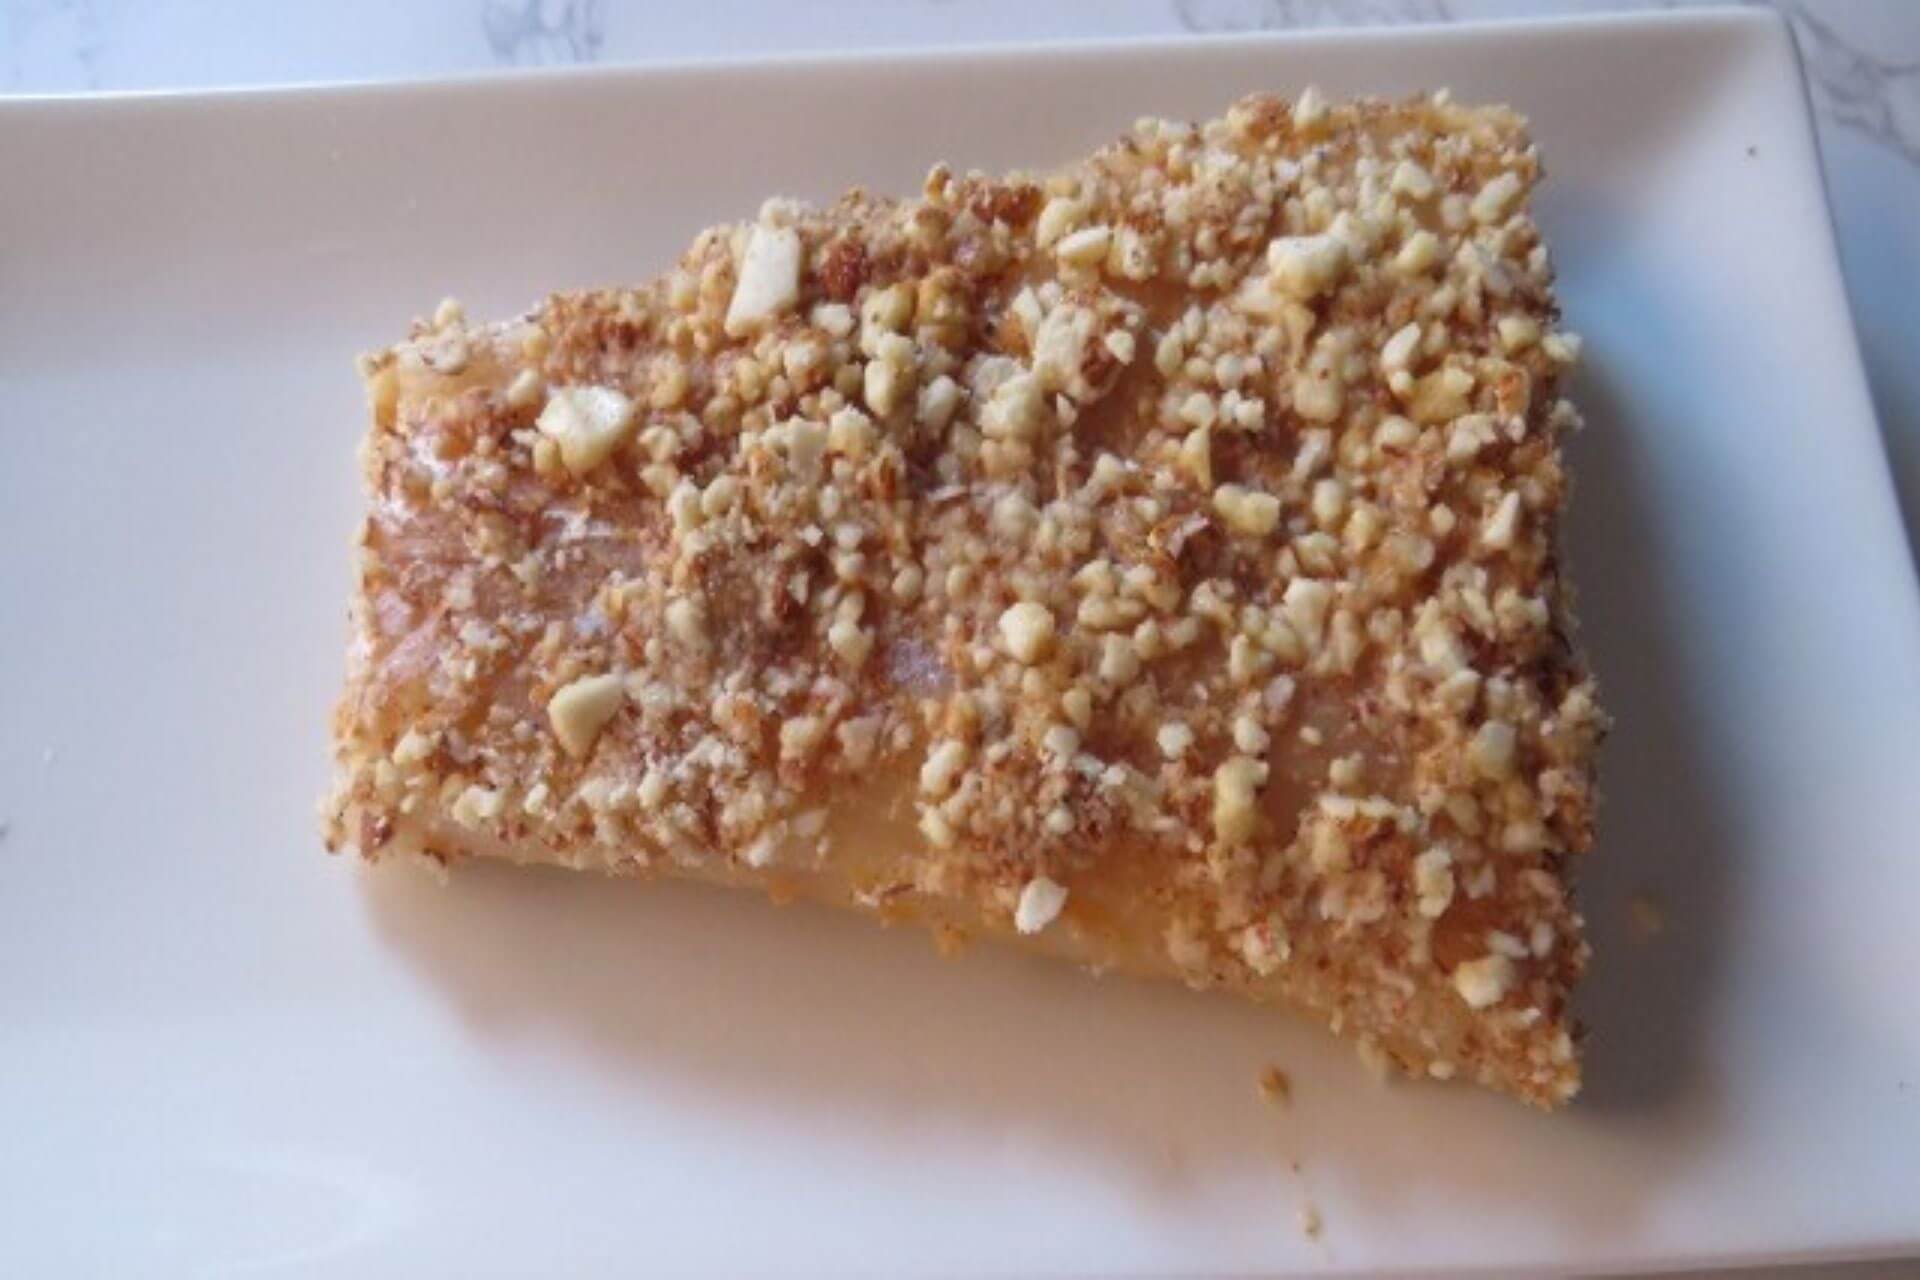 almonds crusted on the cod fillets